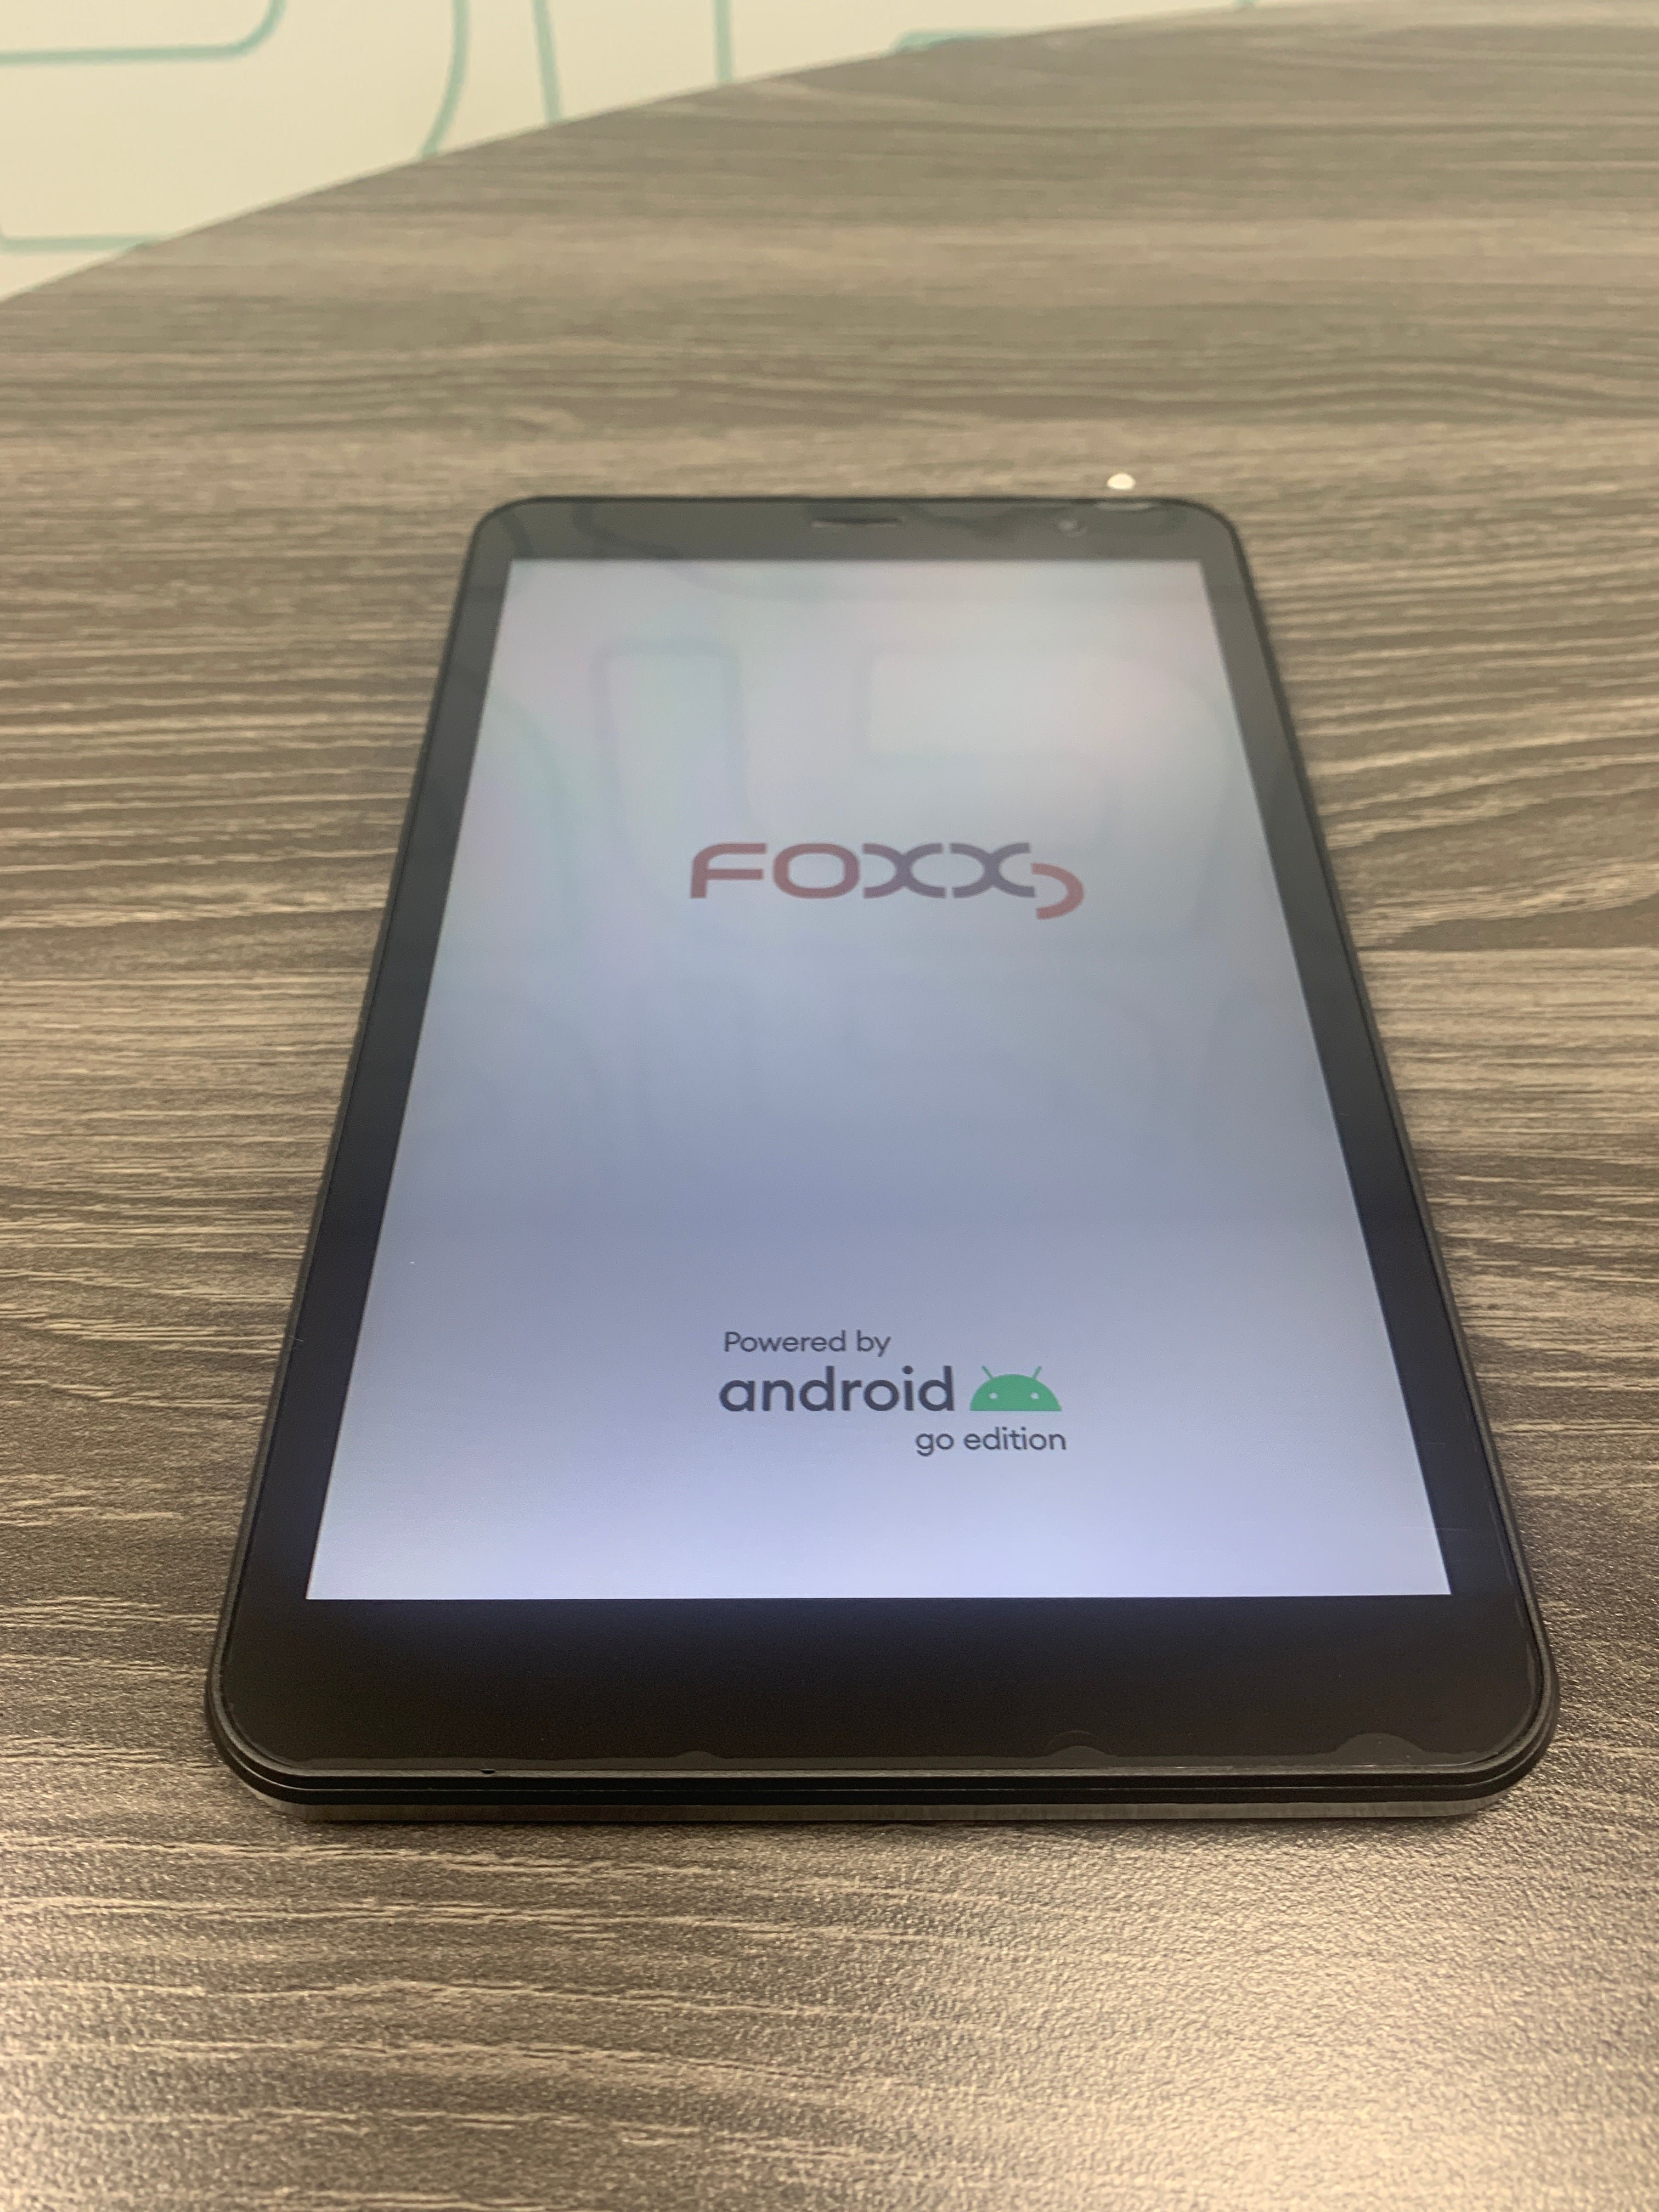 FoxxD T8 Black 32GB (4G LTE) Android Tablet